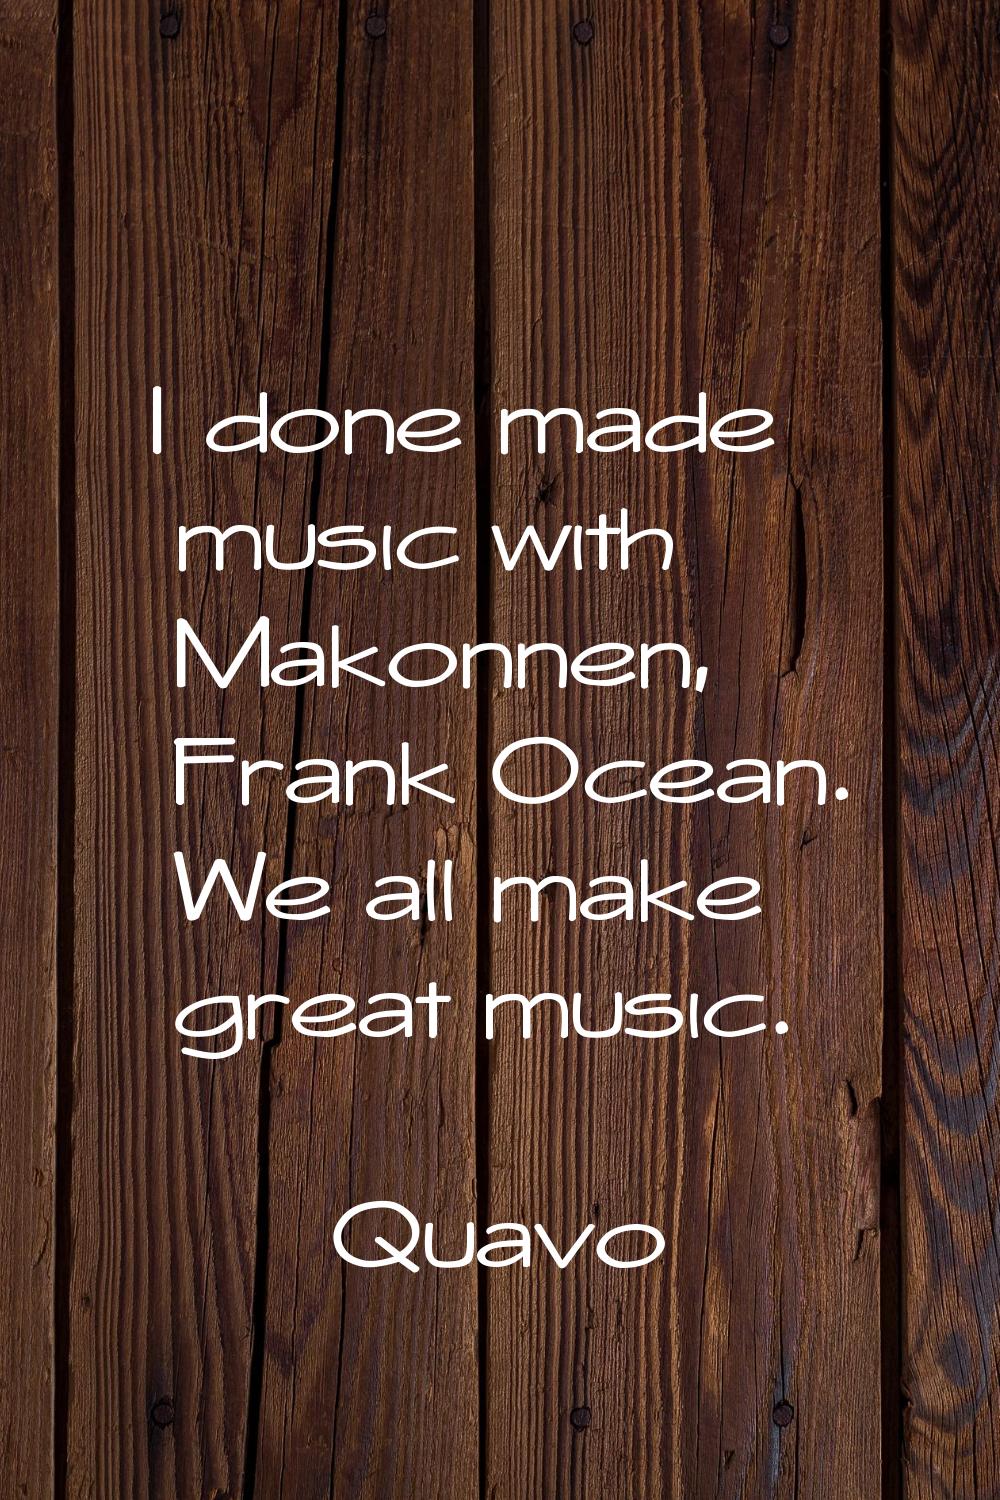 I done made music with Makonnen, Frank Ocean. We all make great music.